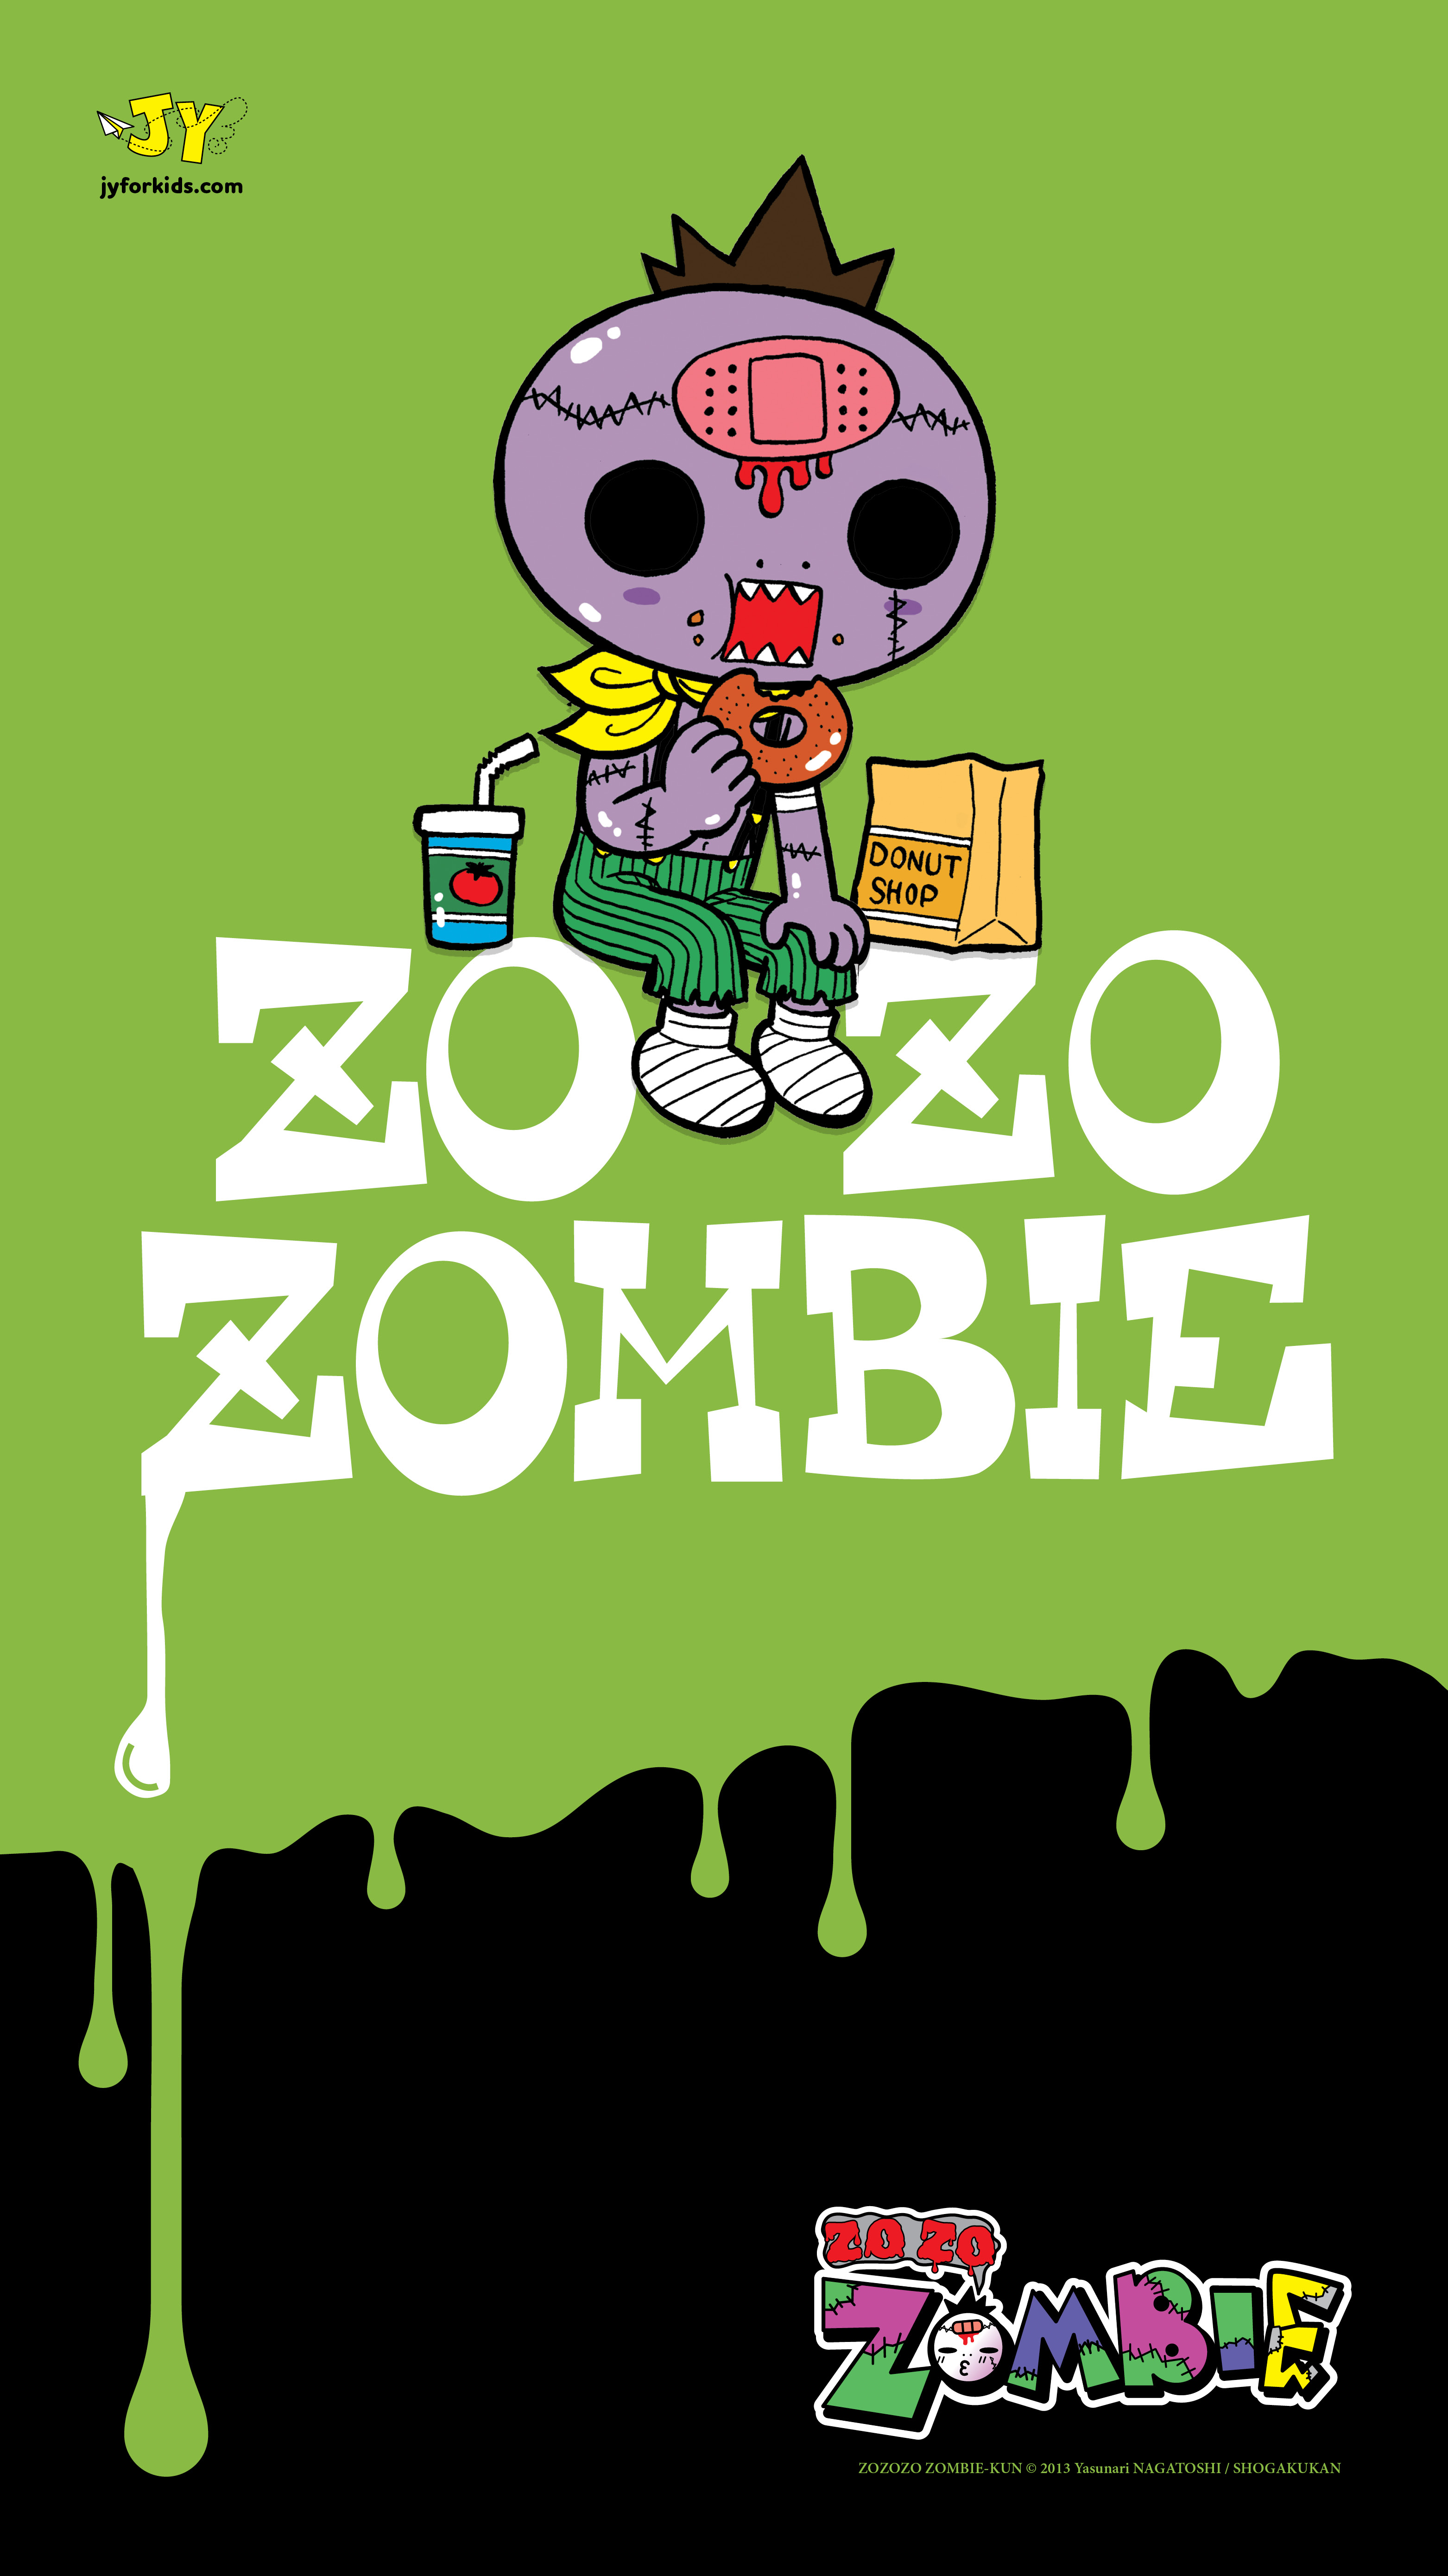 Zombie-ANDROID_11